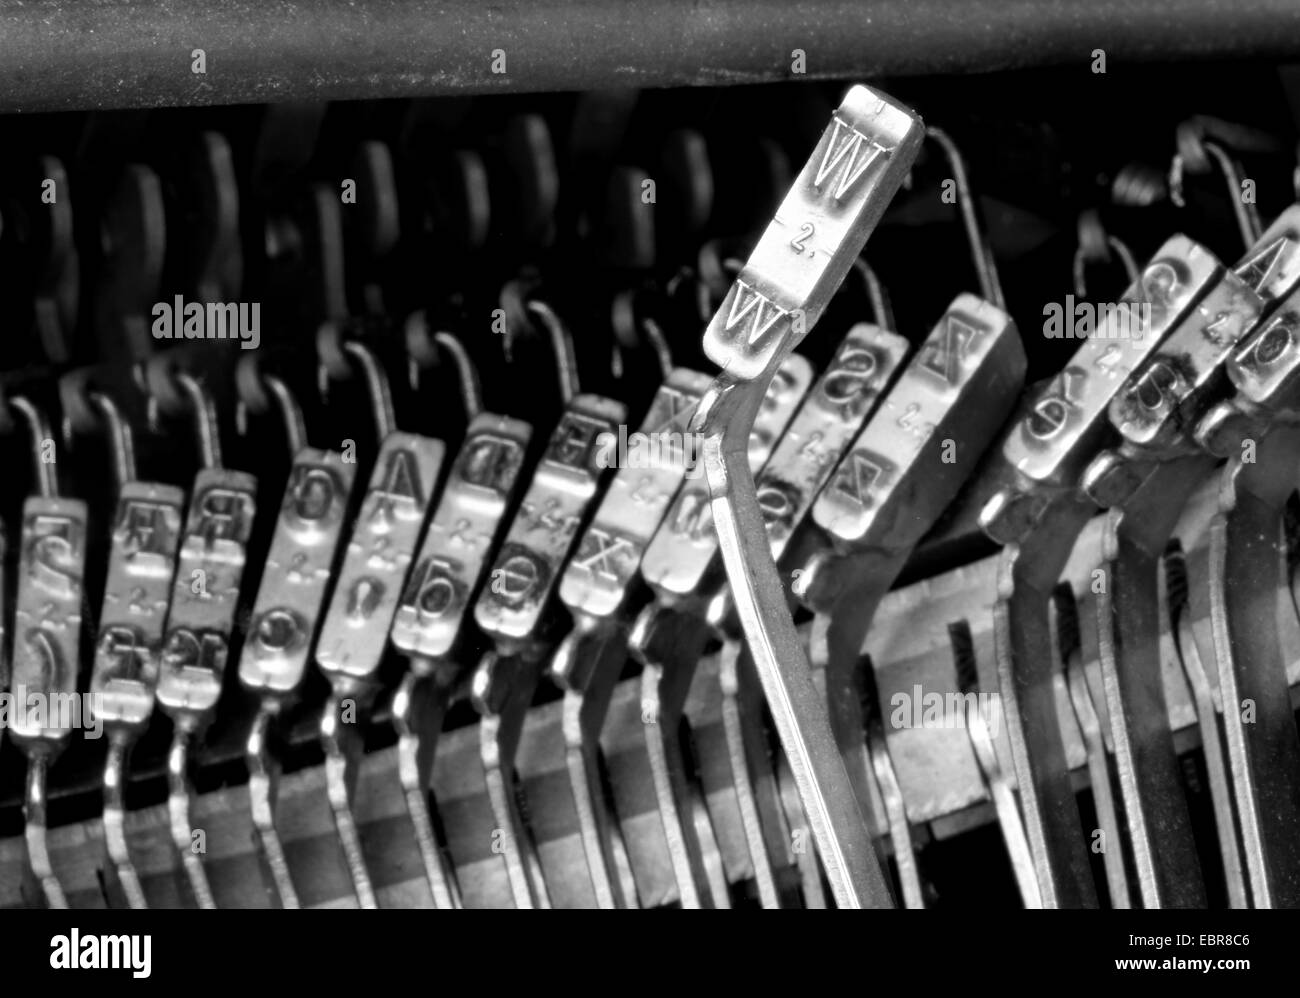 W hammers for writing with an ancient manual typewriter Stock Photo